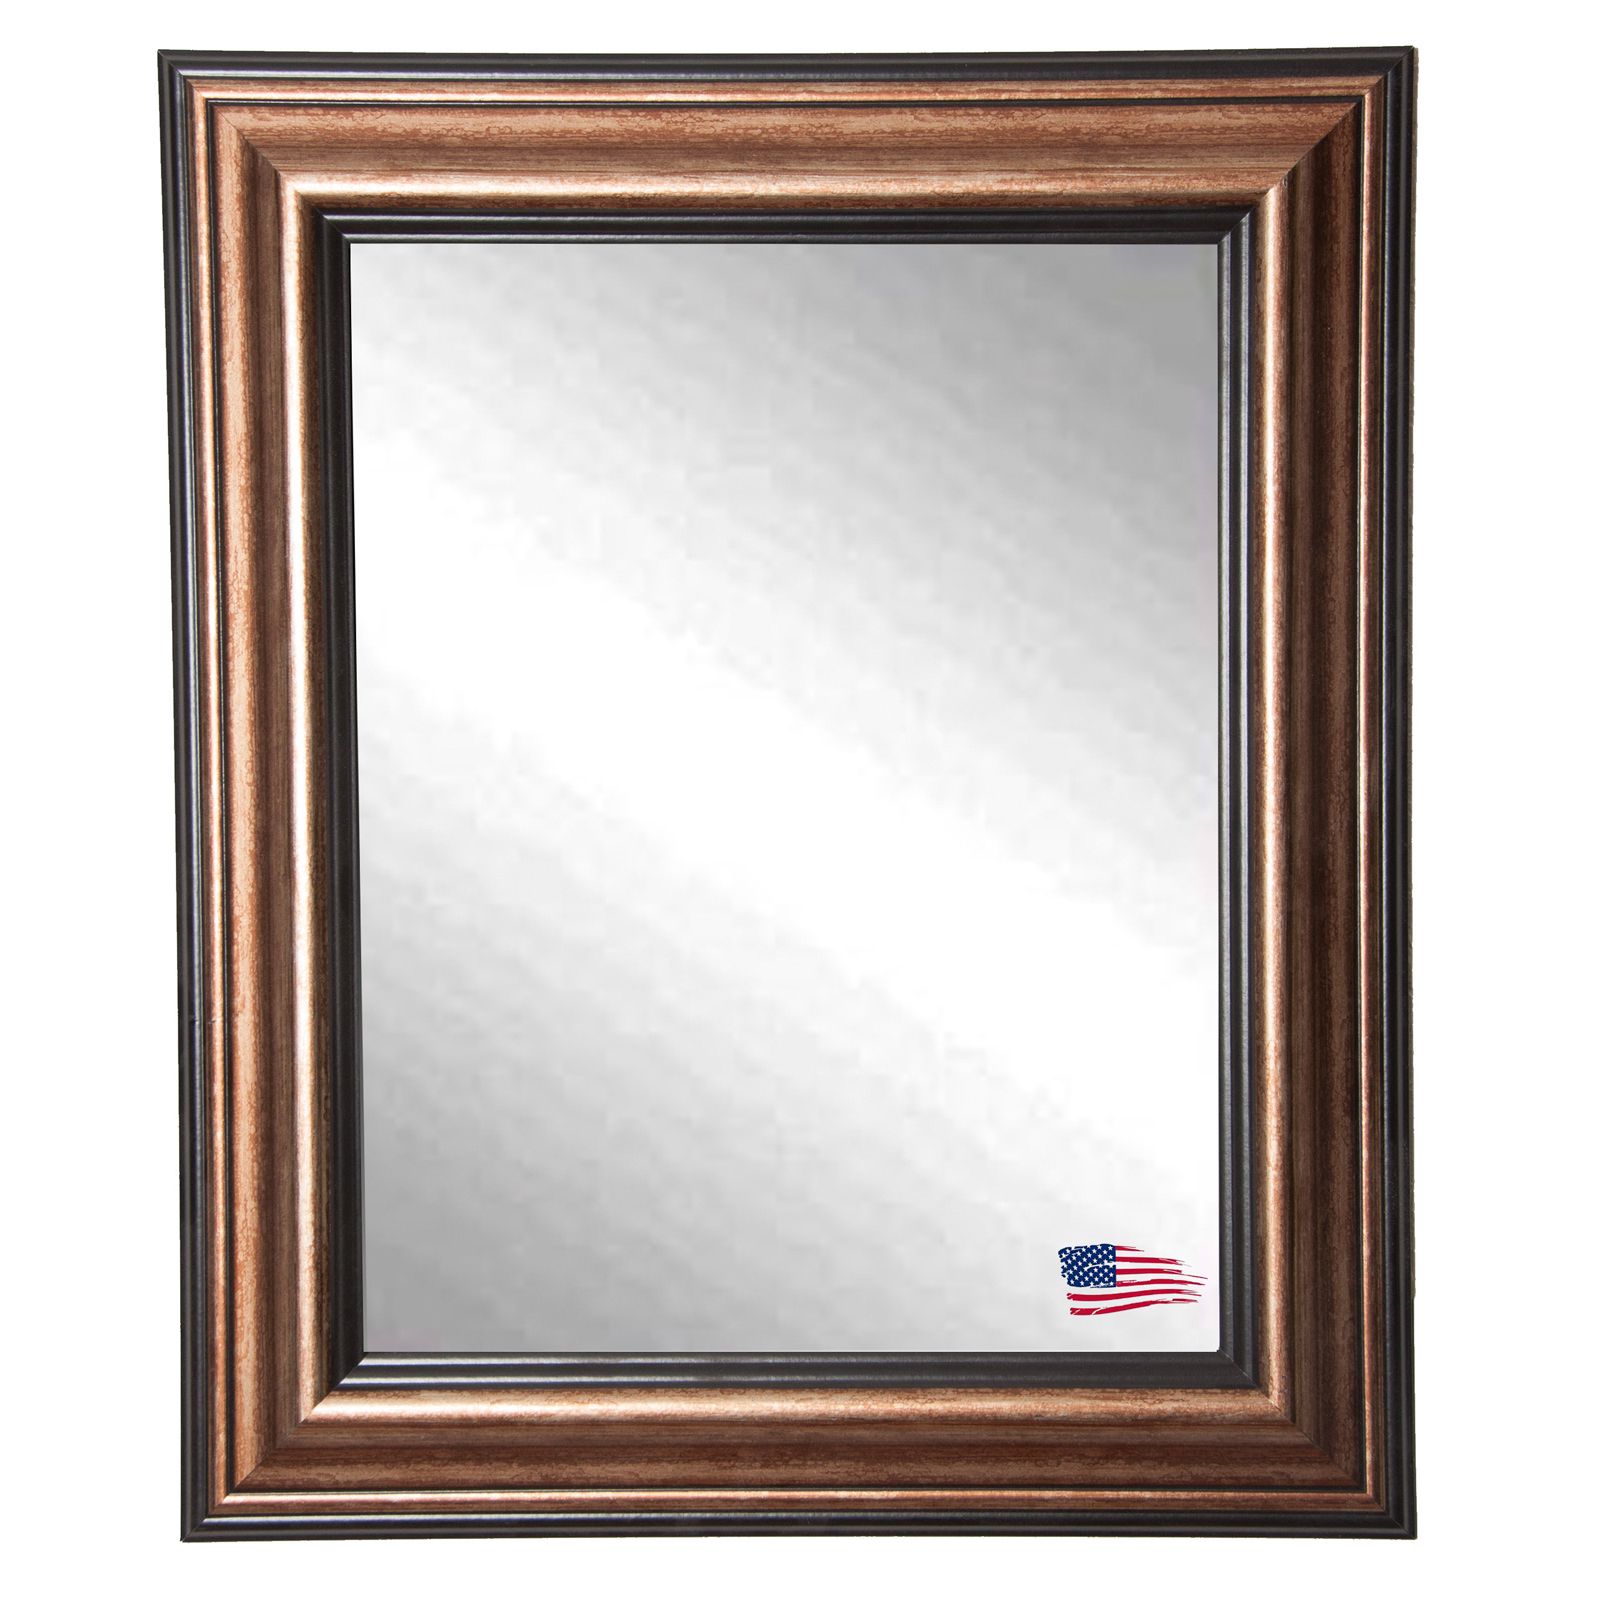 Rayne Mirrors Smoked Bronze Wall Mirror – Mirrors At Hayneedle Intended For Silver And Bronze Wall Mirrors (View 7 of 15)